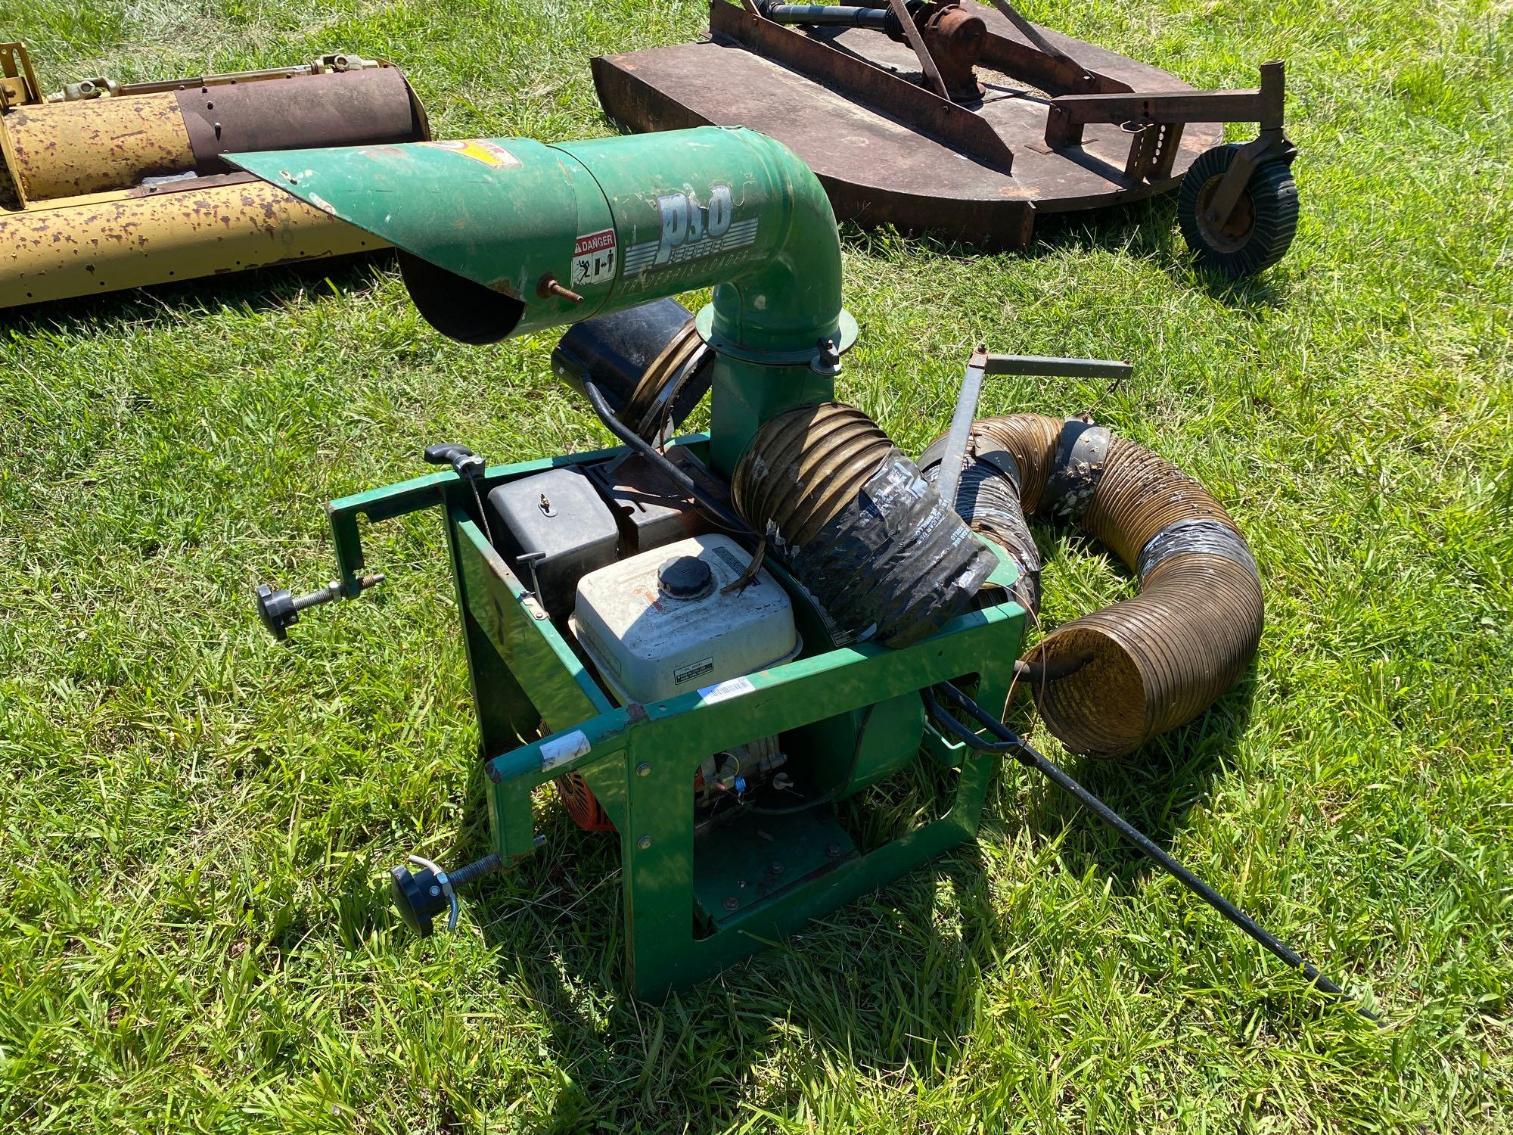 Image for Billy Goat Leaf Vac w/ 11hp Honda, Needs a tune up per seller